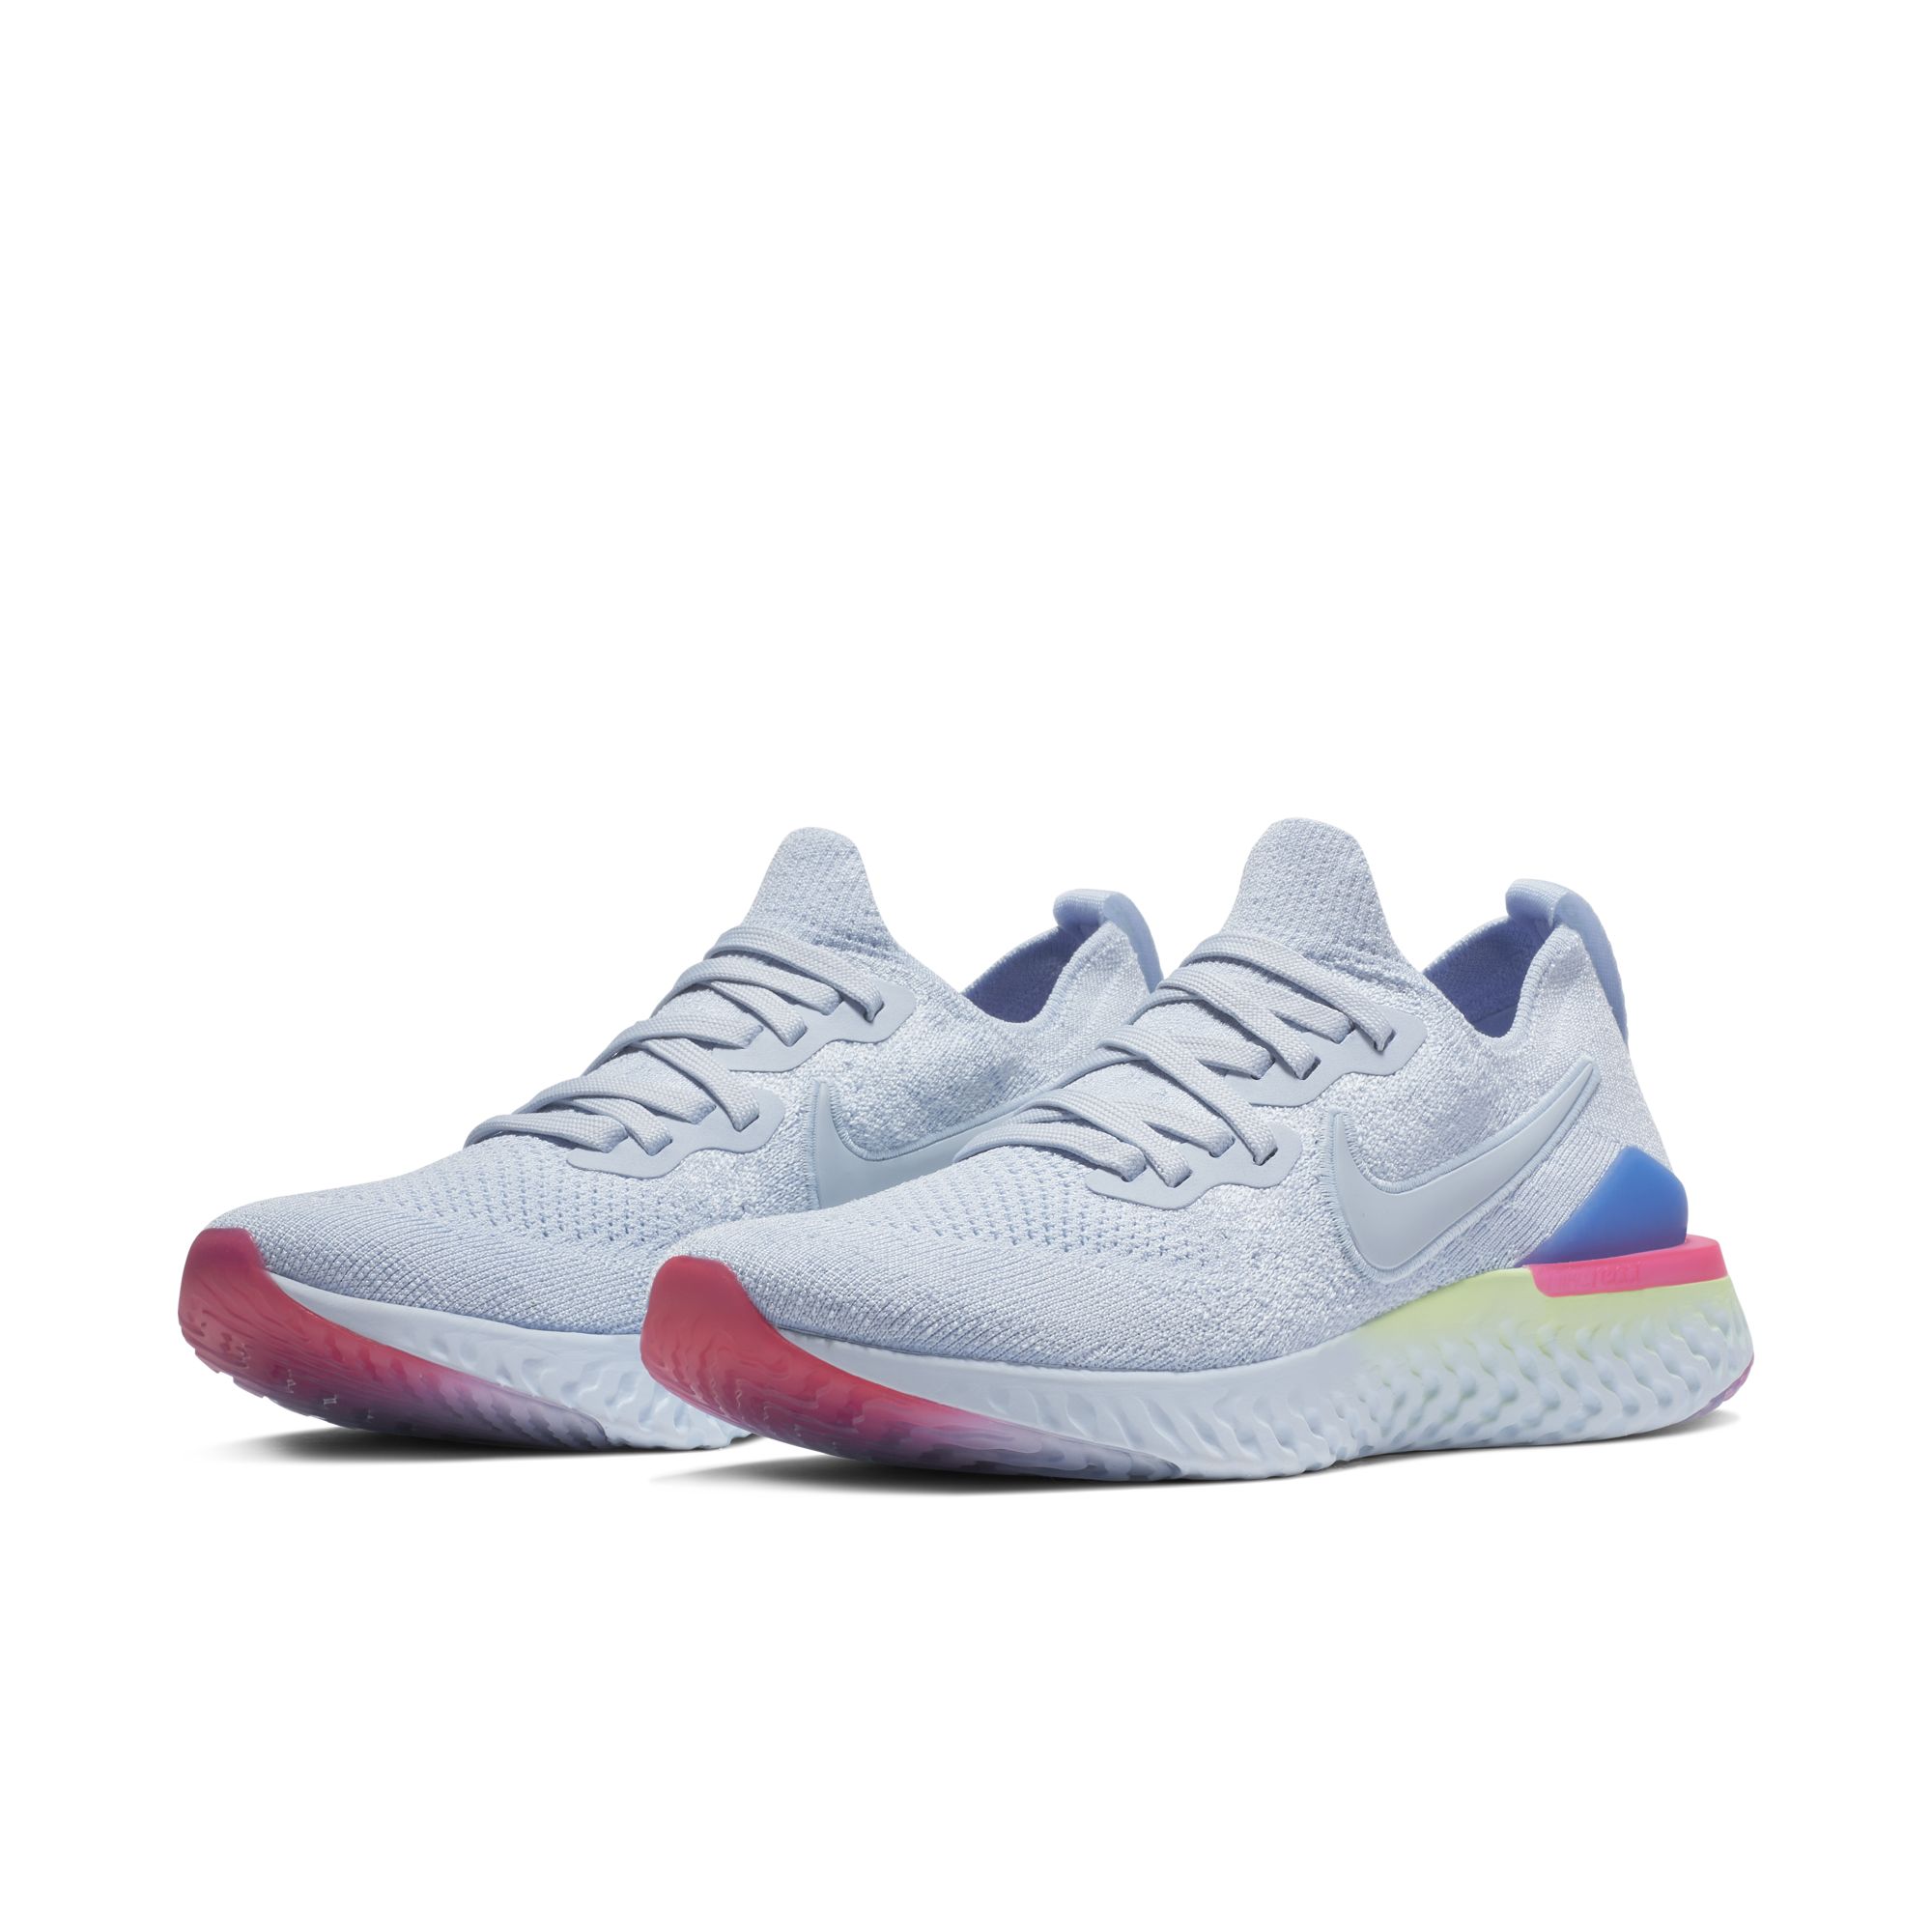 nike epic react flyknit 2 running shoes - sp19